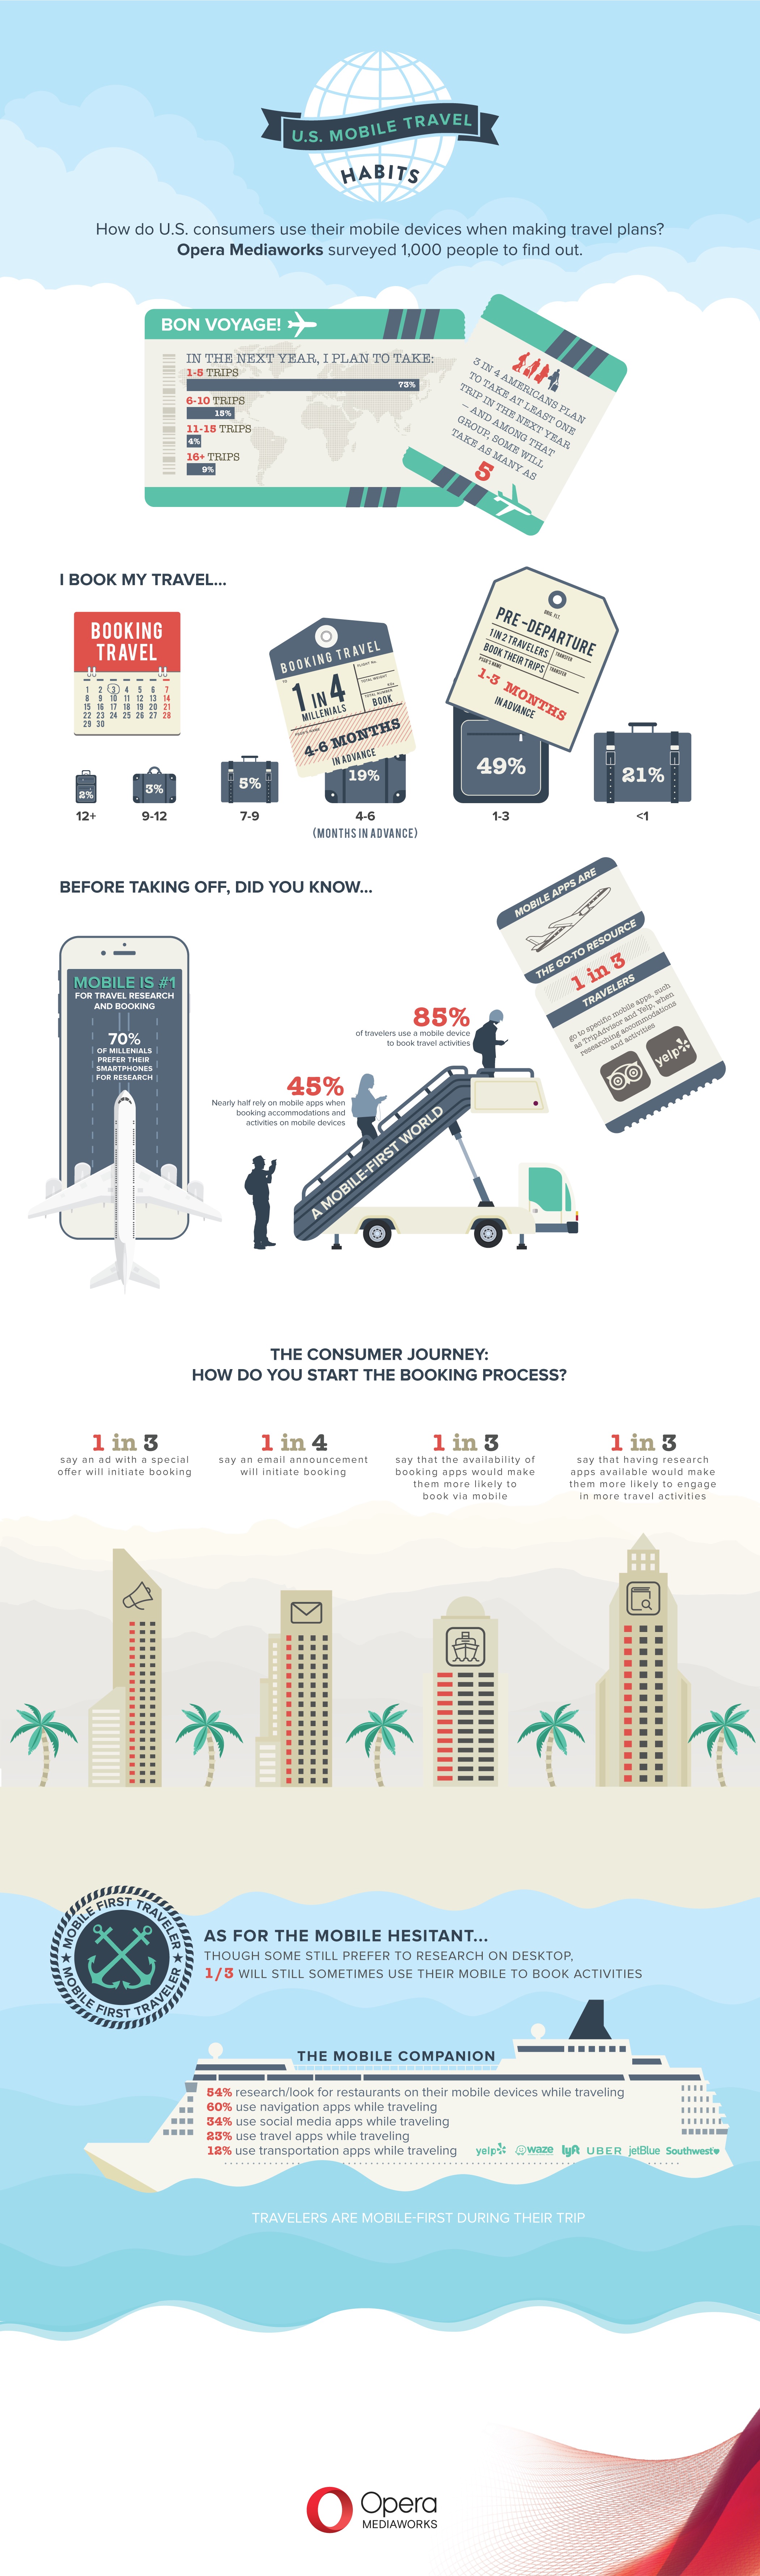 85 per Cent of Travellers Book Activities on Mobile (Infographic)